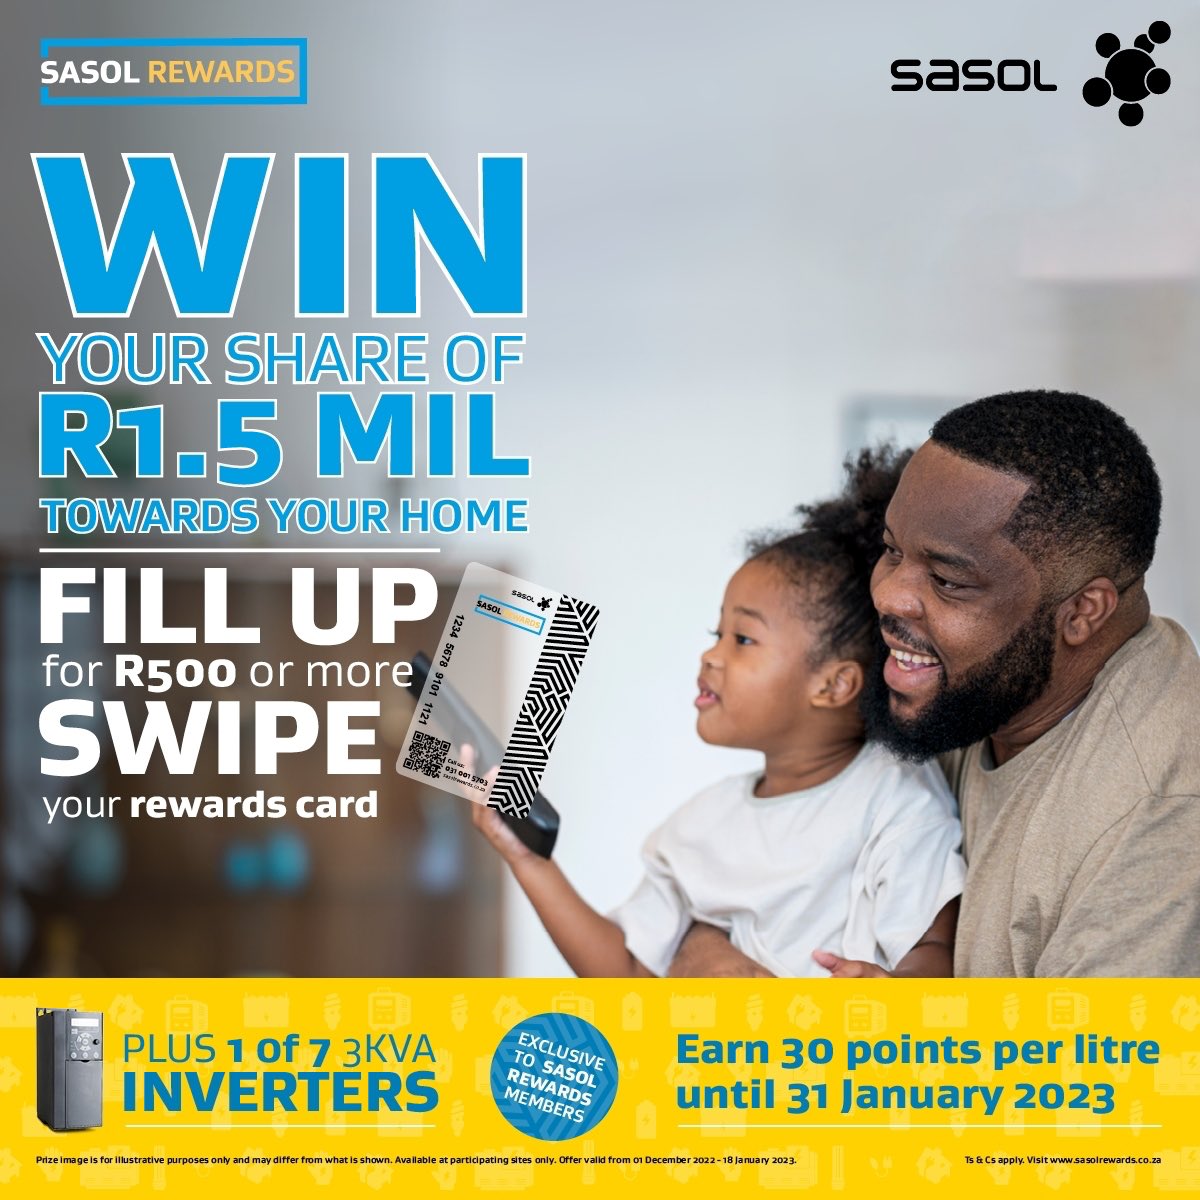 I really need an inverter cause do you know the pain of creating content with your ring light and loadshedding hits? 😭 I hope I win it through #SasolRewards 😩🕯

bit.ly/3hOrj2f